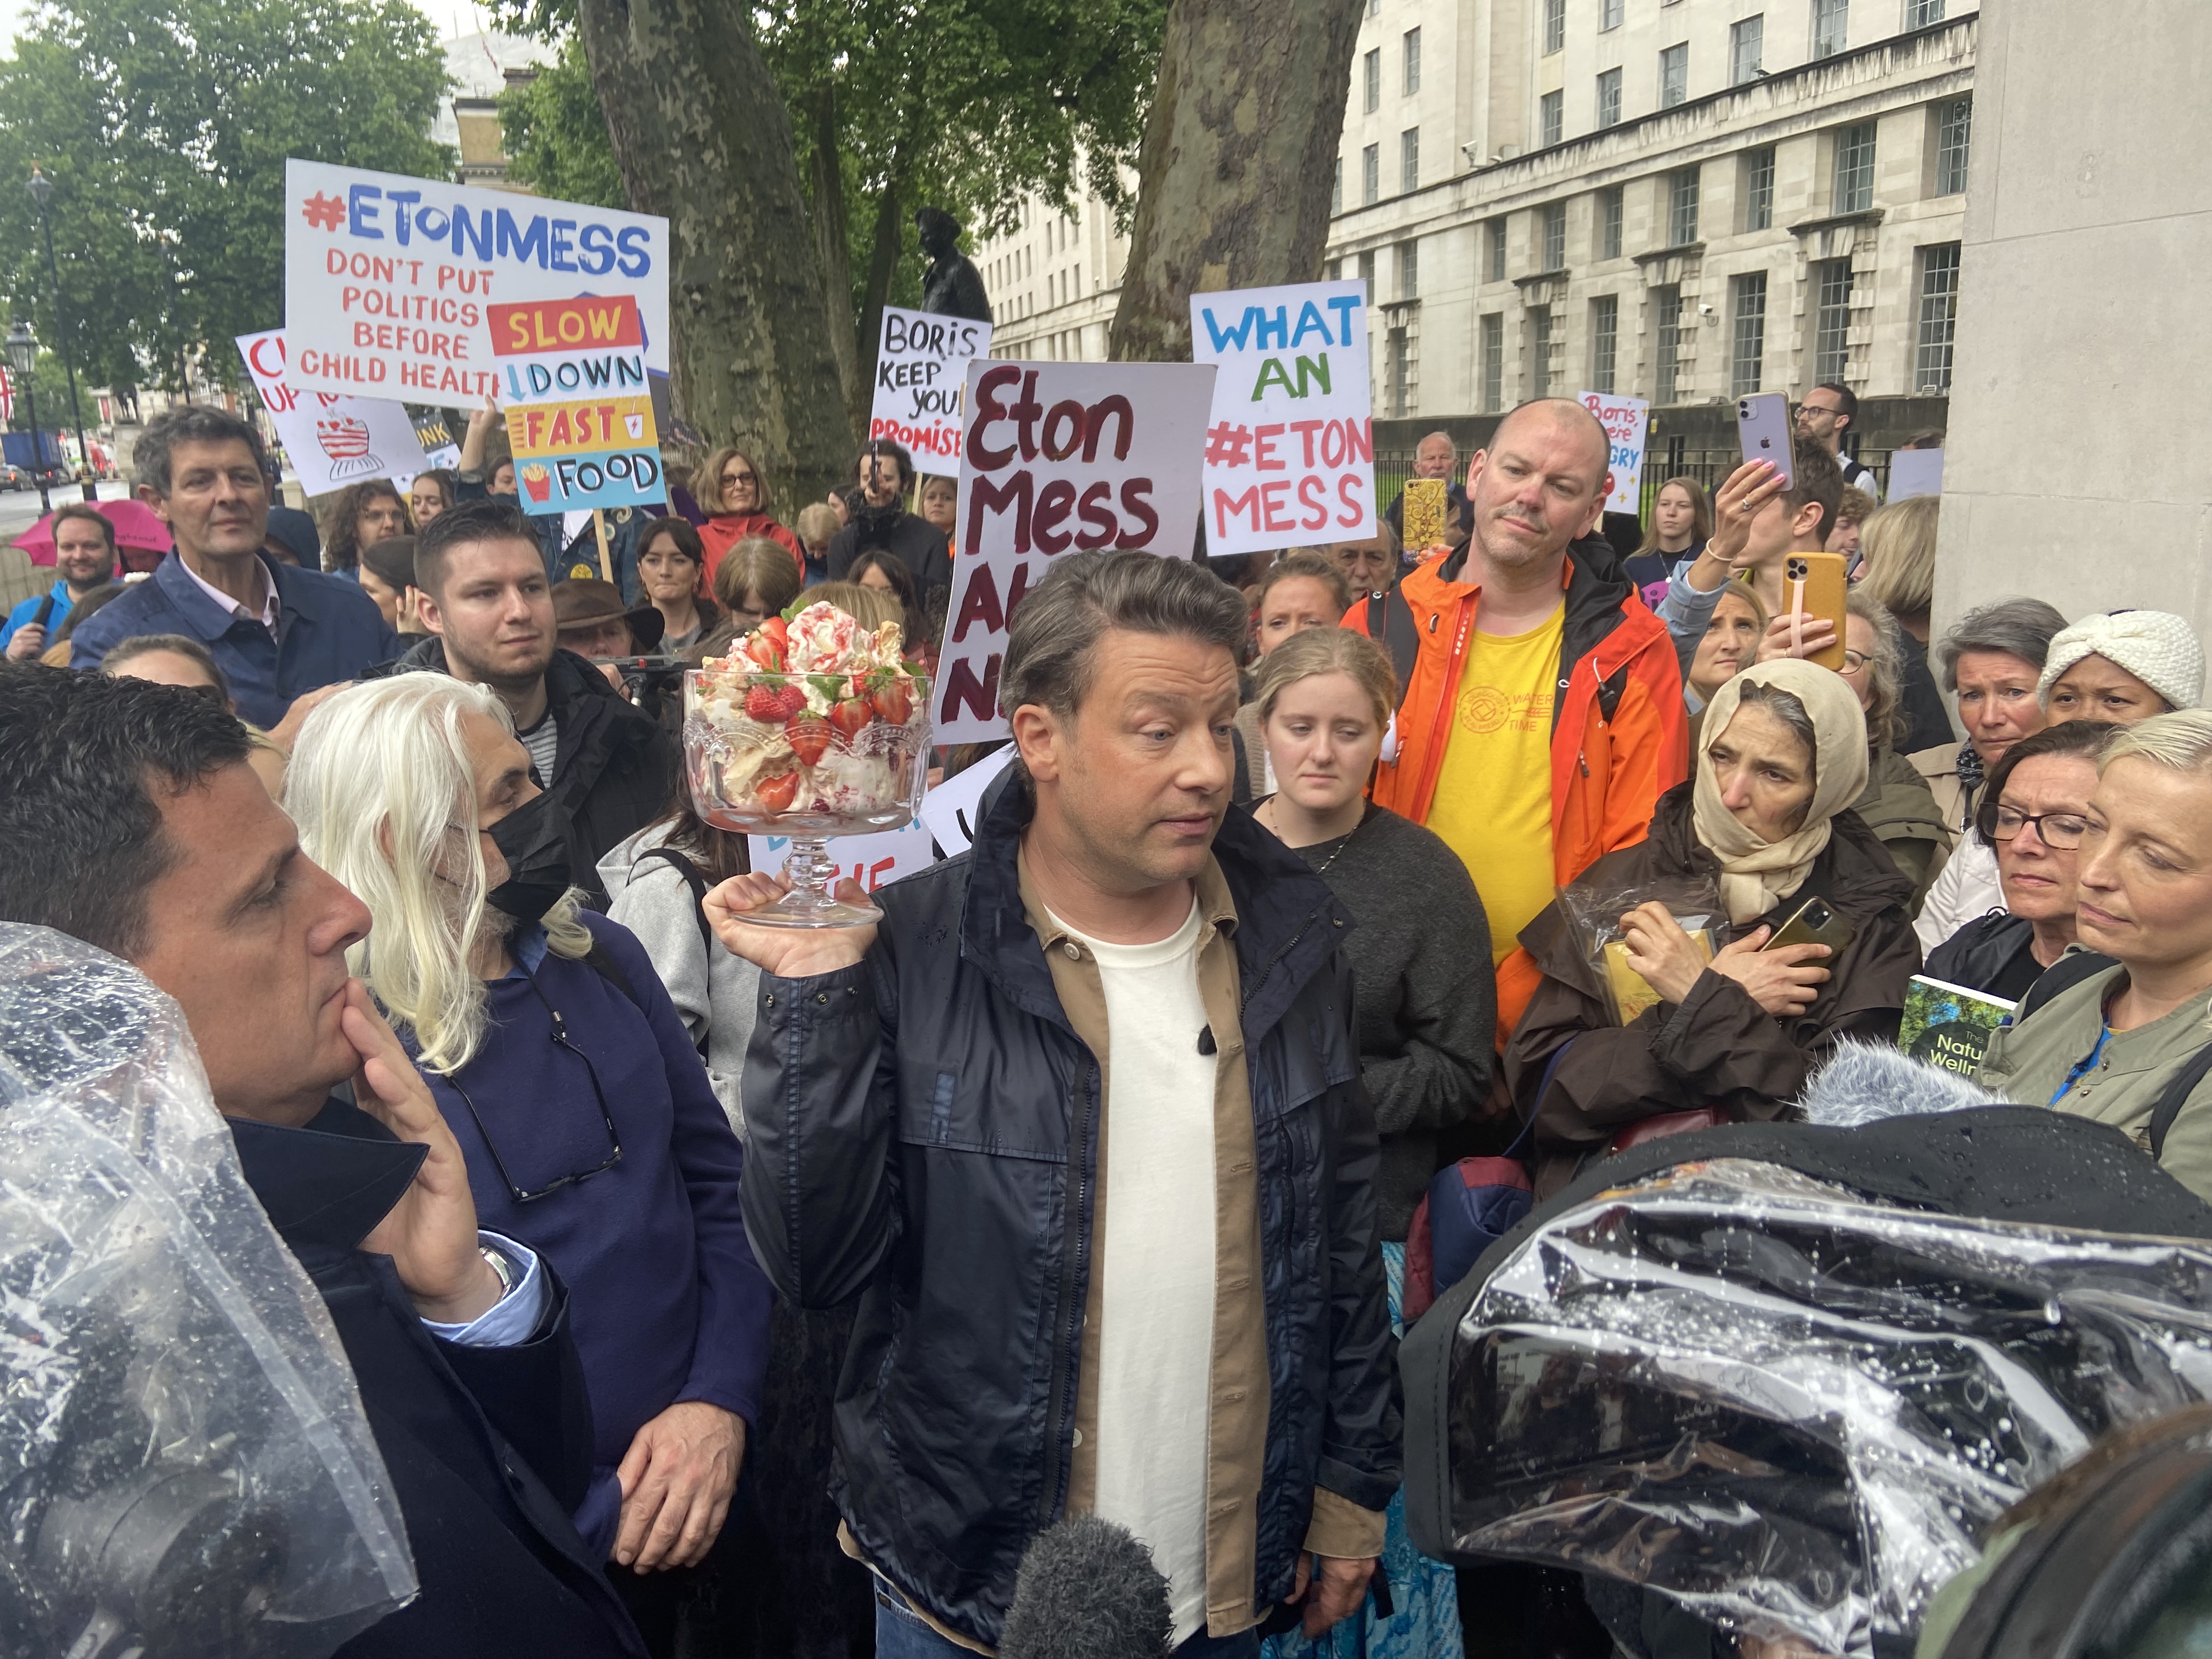 Jamie Oliver surrounded by supporters